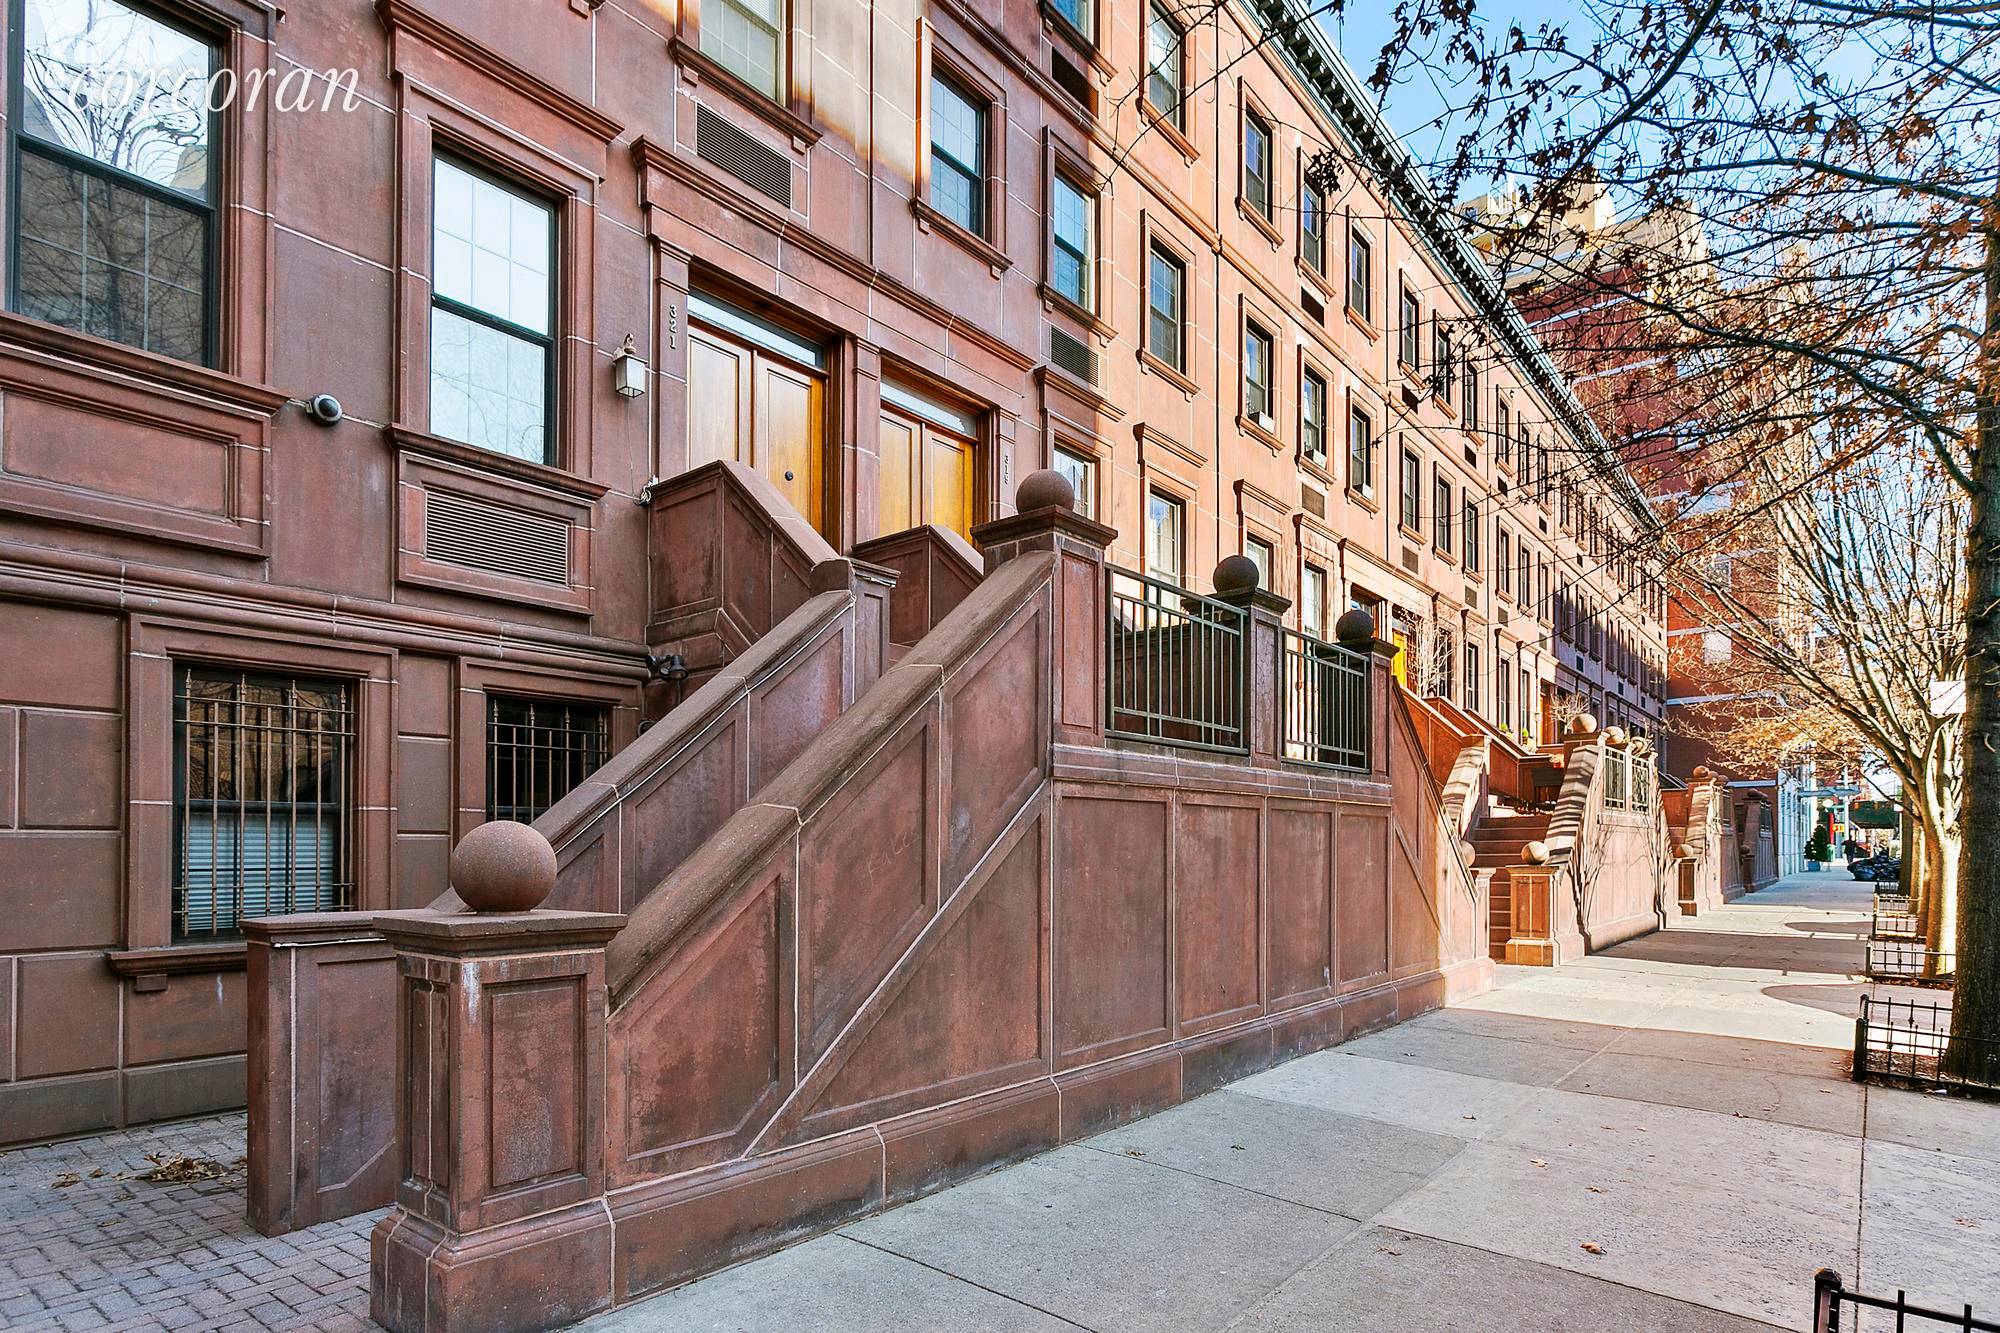 OWNER SAYS SELL. Brownstone living at its best in this art centered area of Harlem.